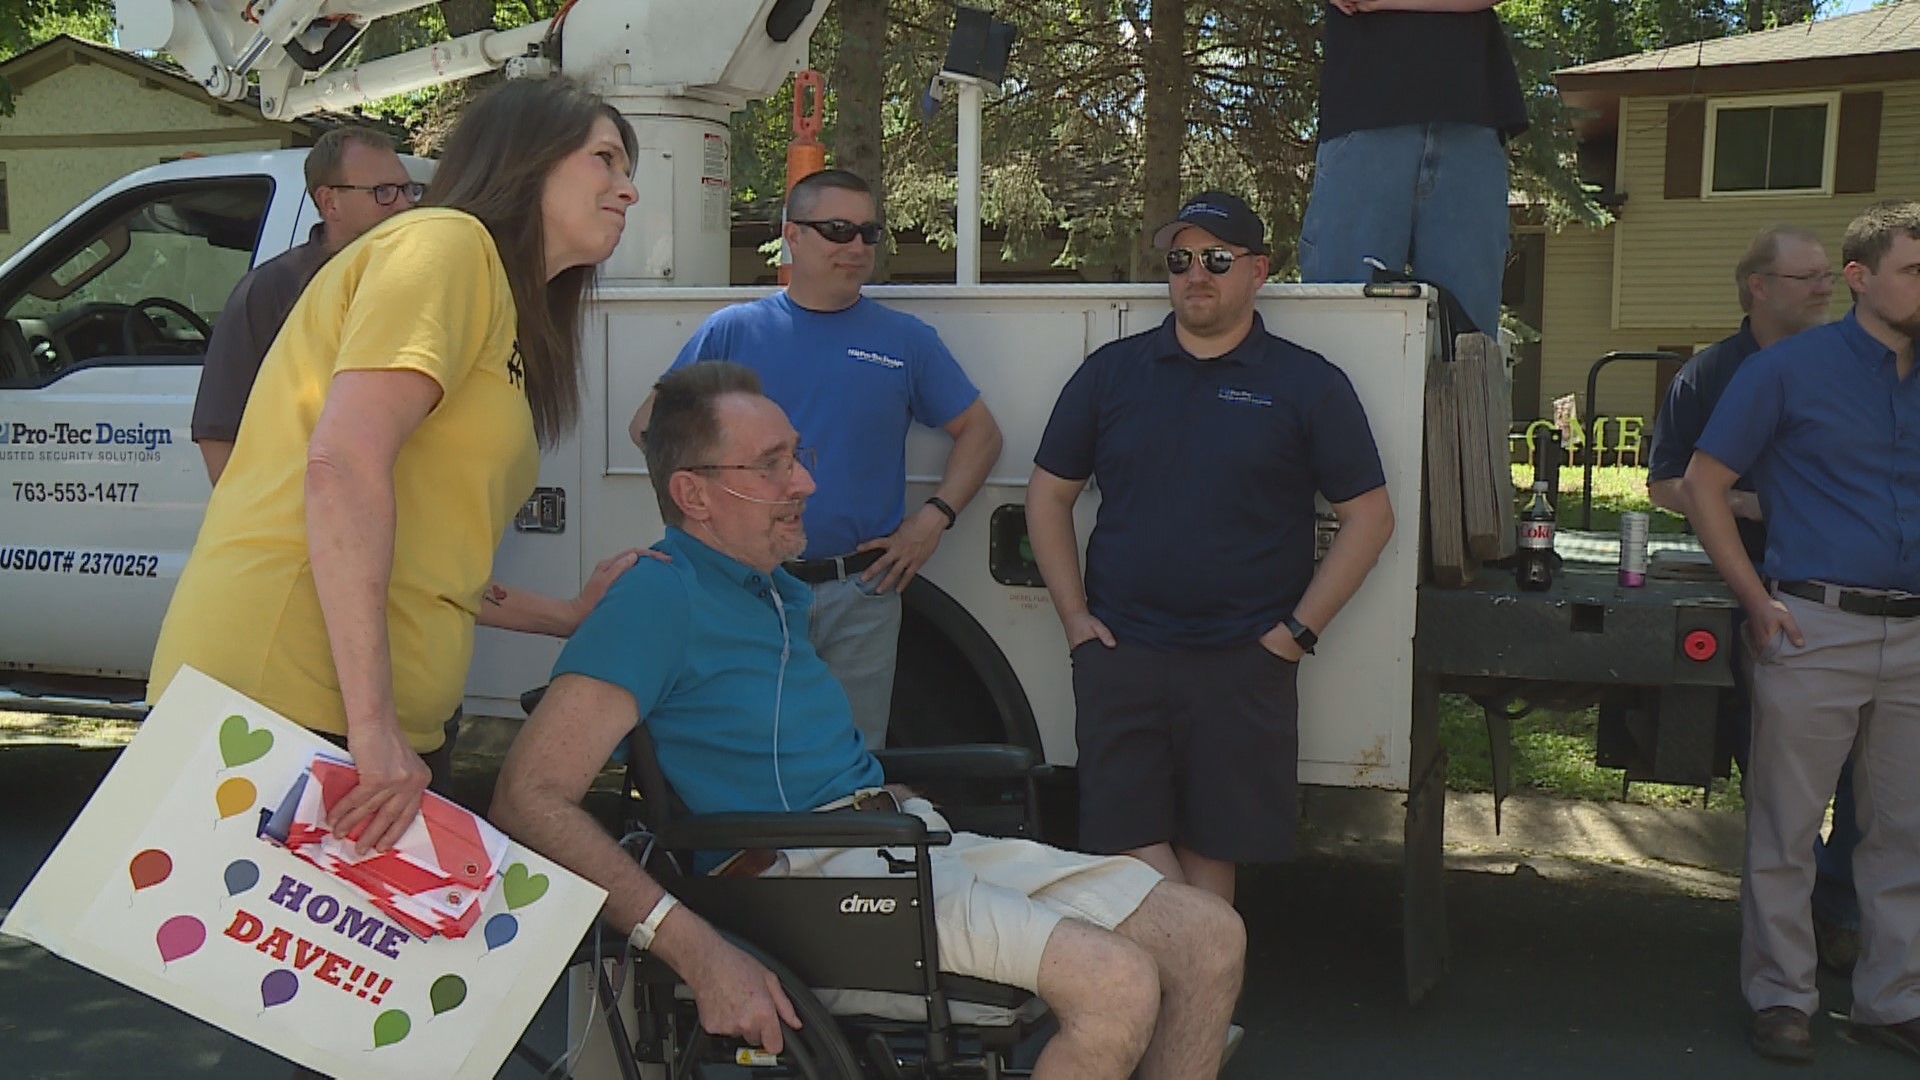 Dave Dentz was surrounded by family, friends and coworkers at a celebration welcoming him home after 208 days.